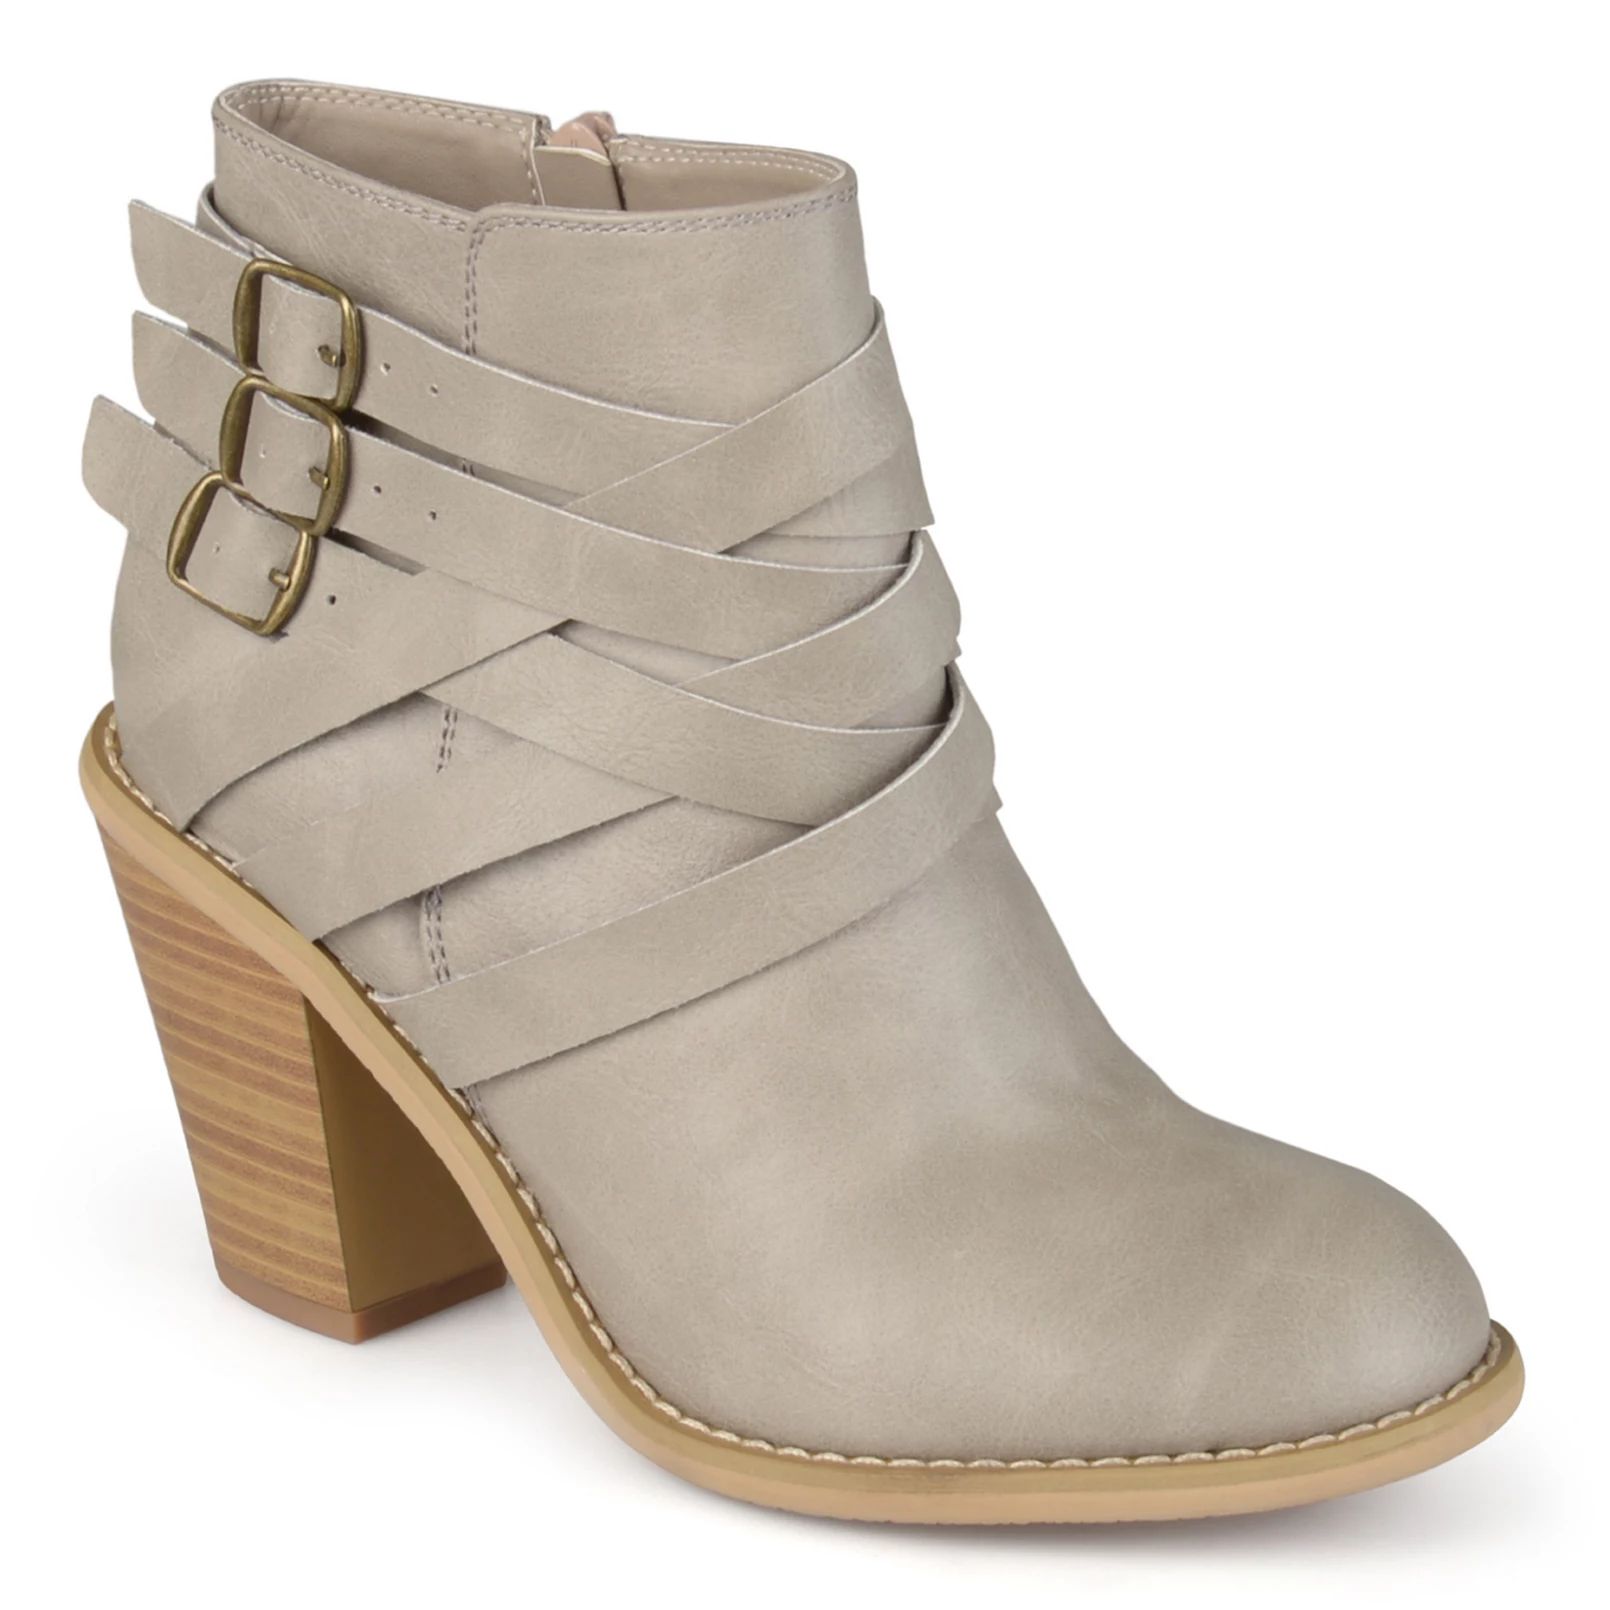 Journee Collection Strap Women's Ankle Boots | Kohl's